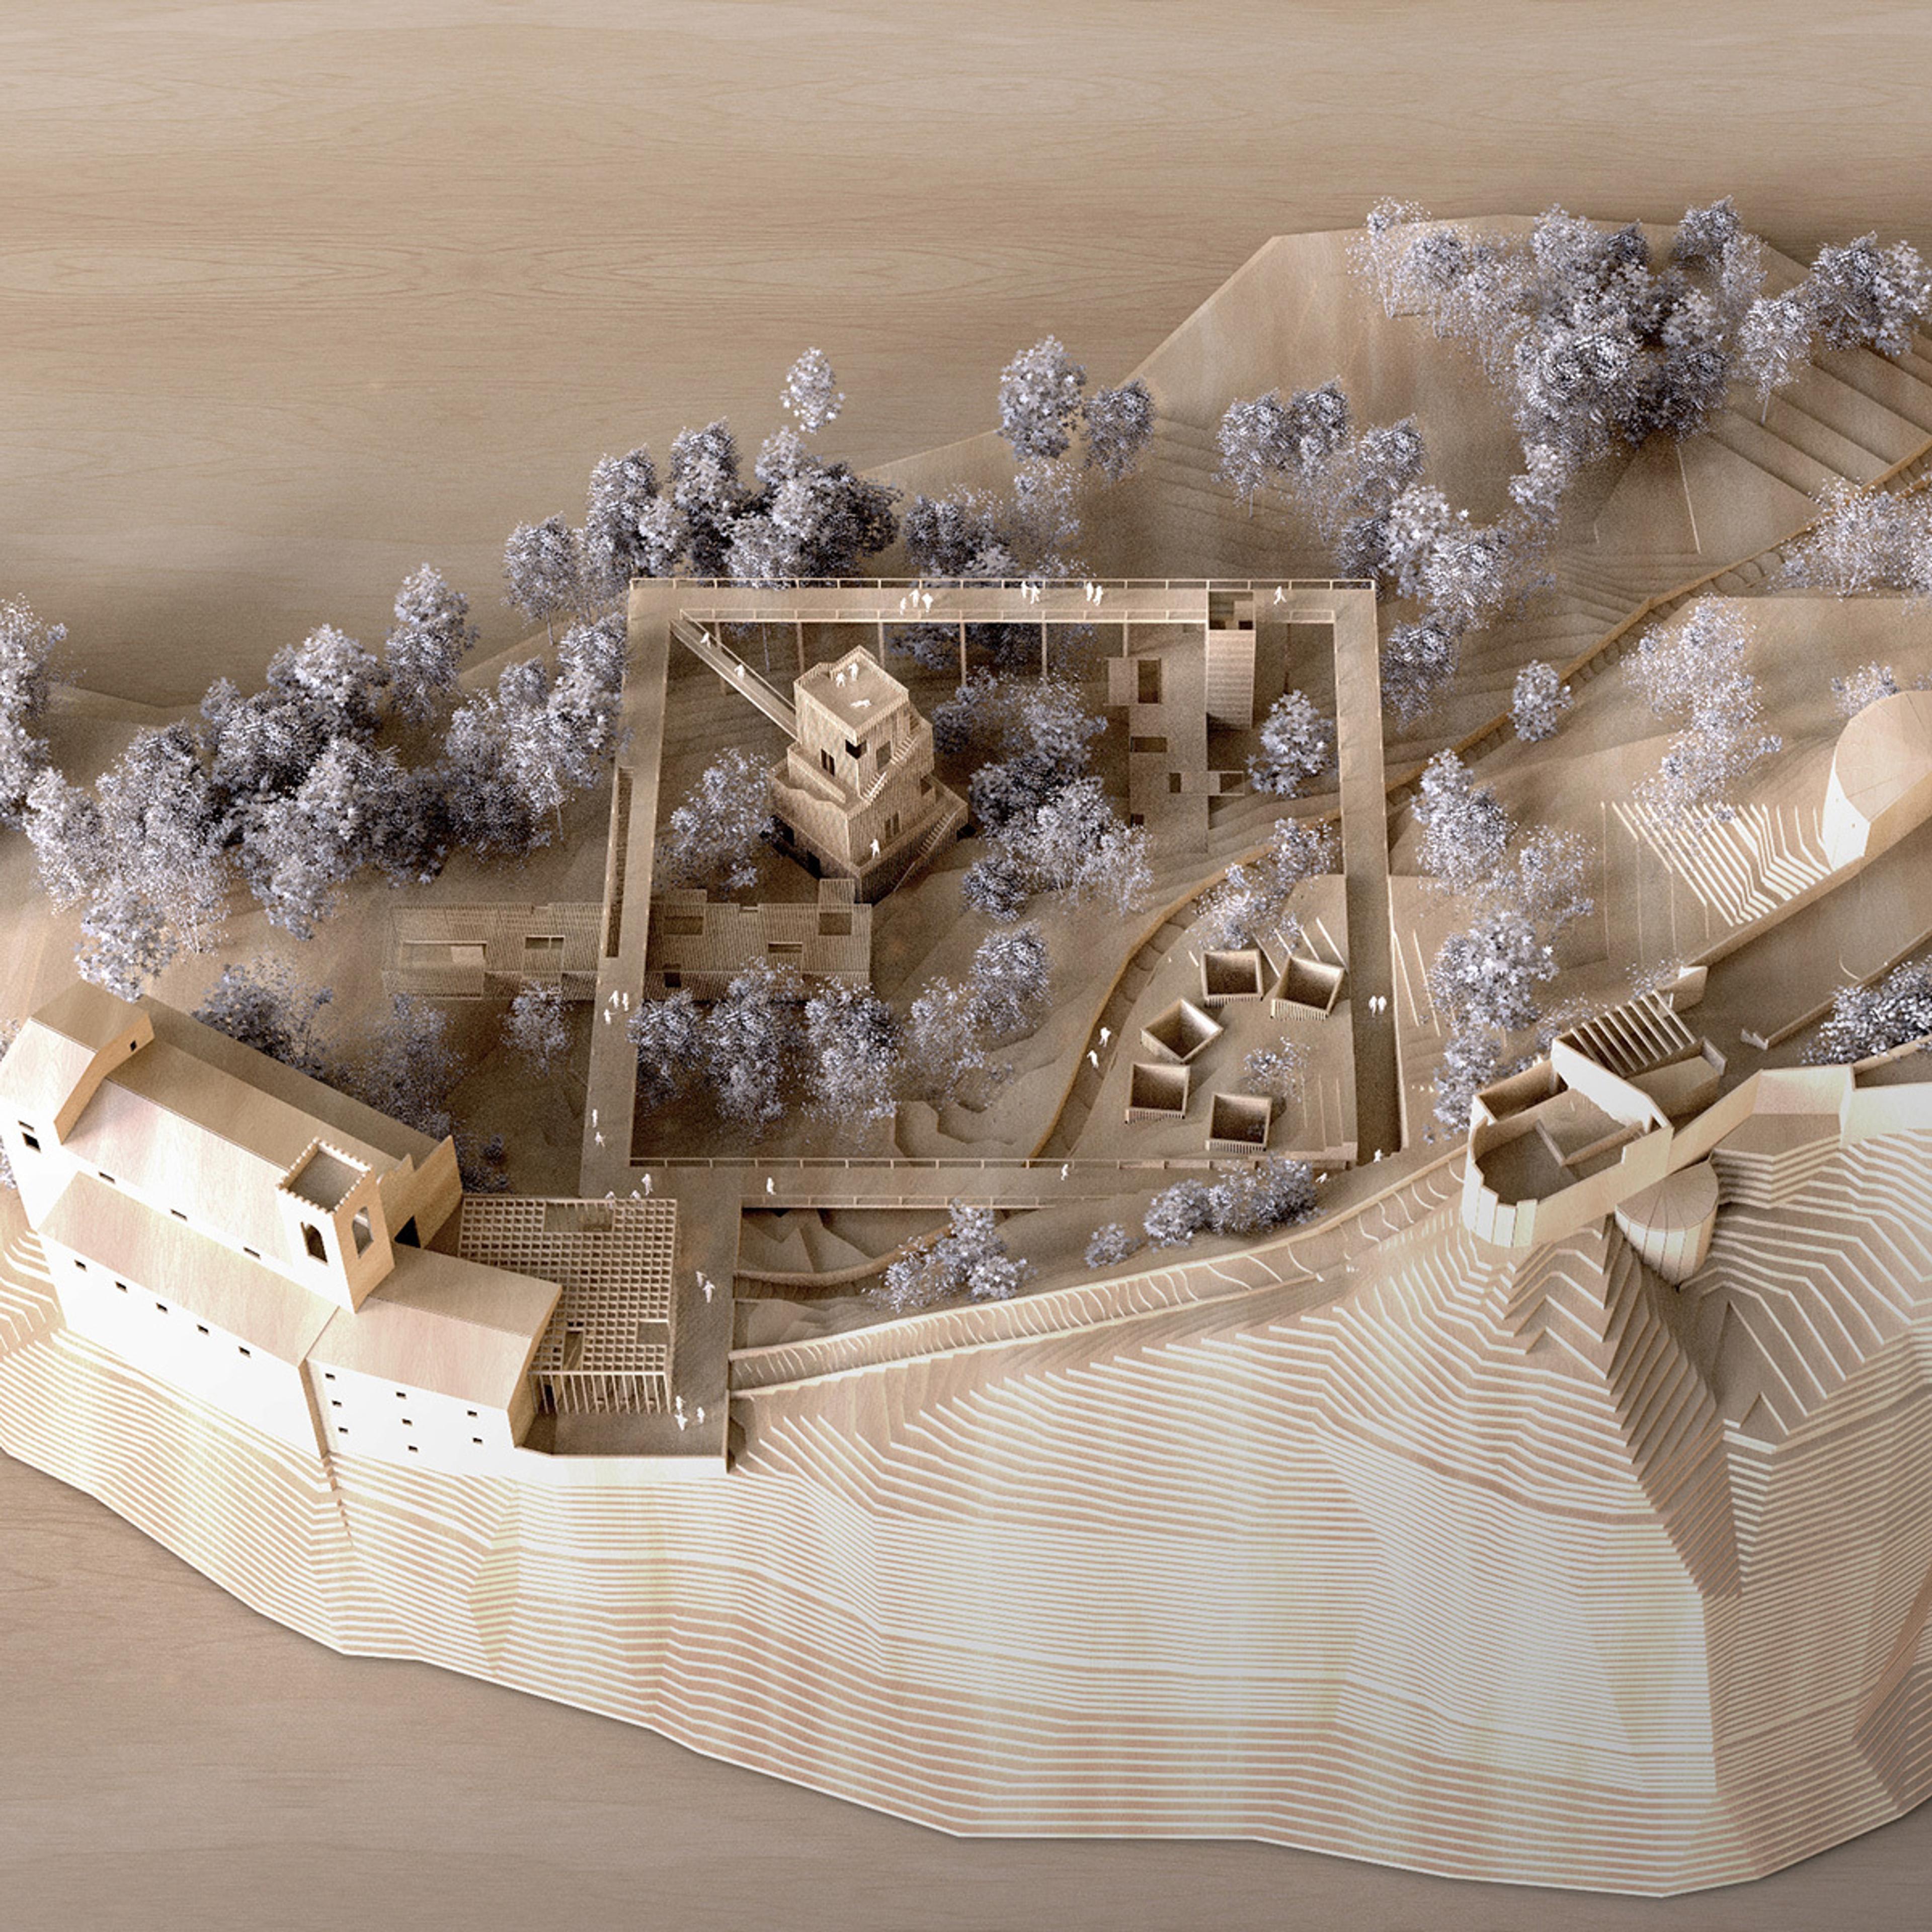 Topographical architectural model